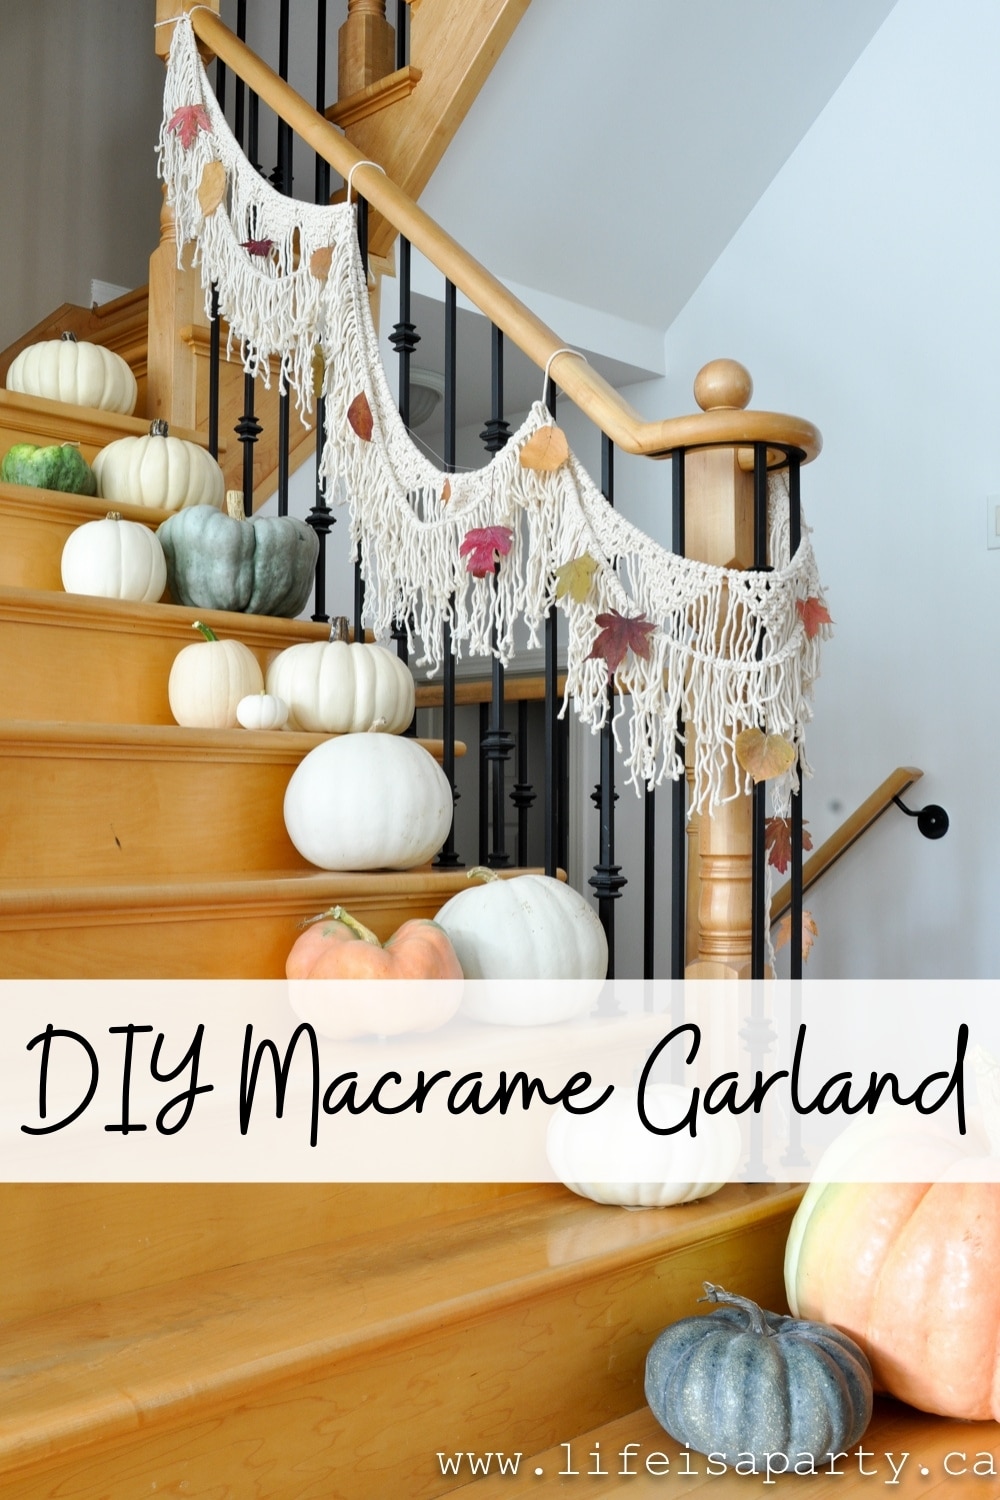 DIY Macrame Garland: make this beautiful macrame bunting using only two easy macrame knots. Beginner project with full tutorial.